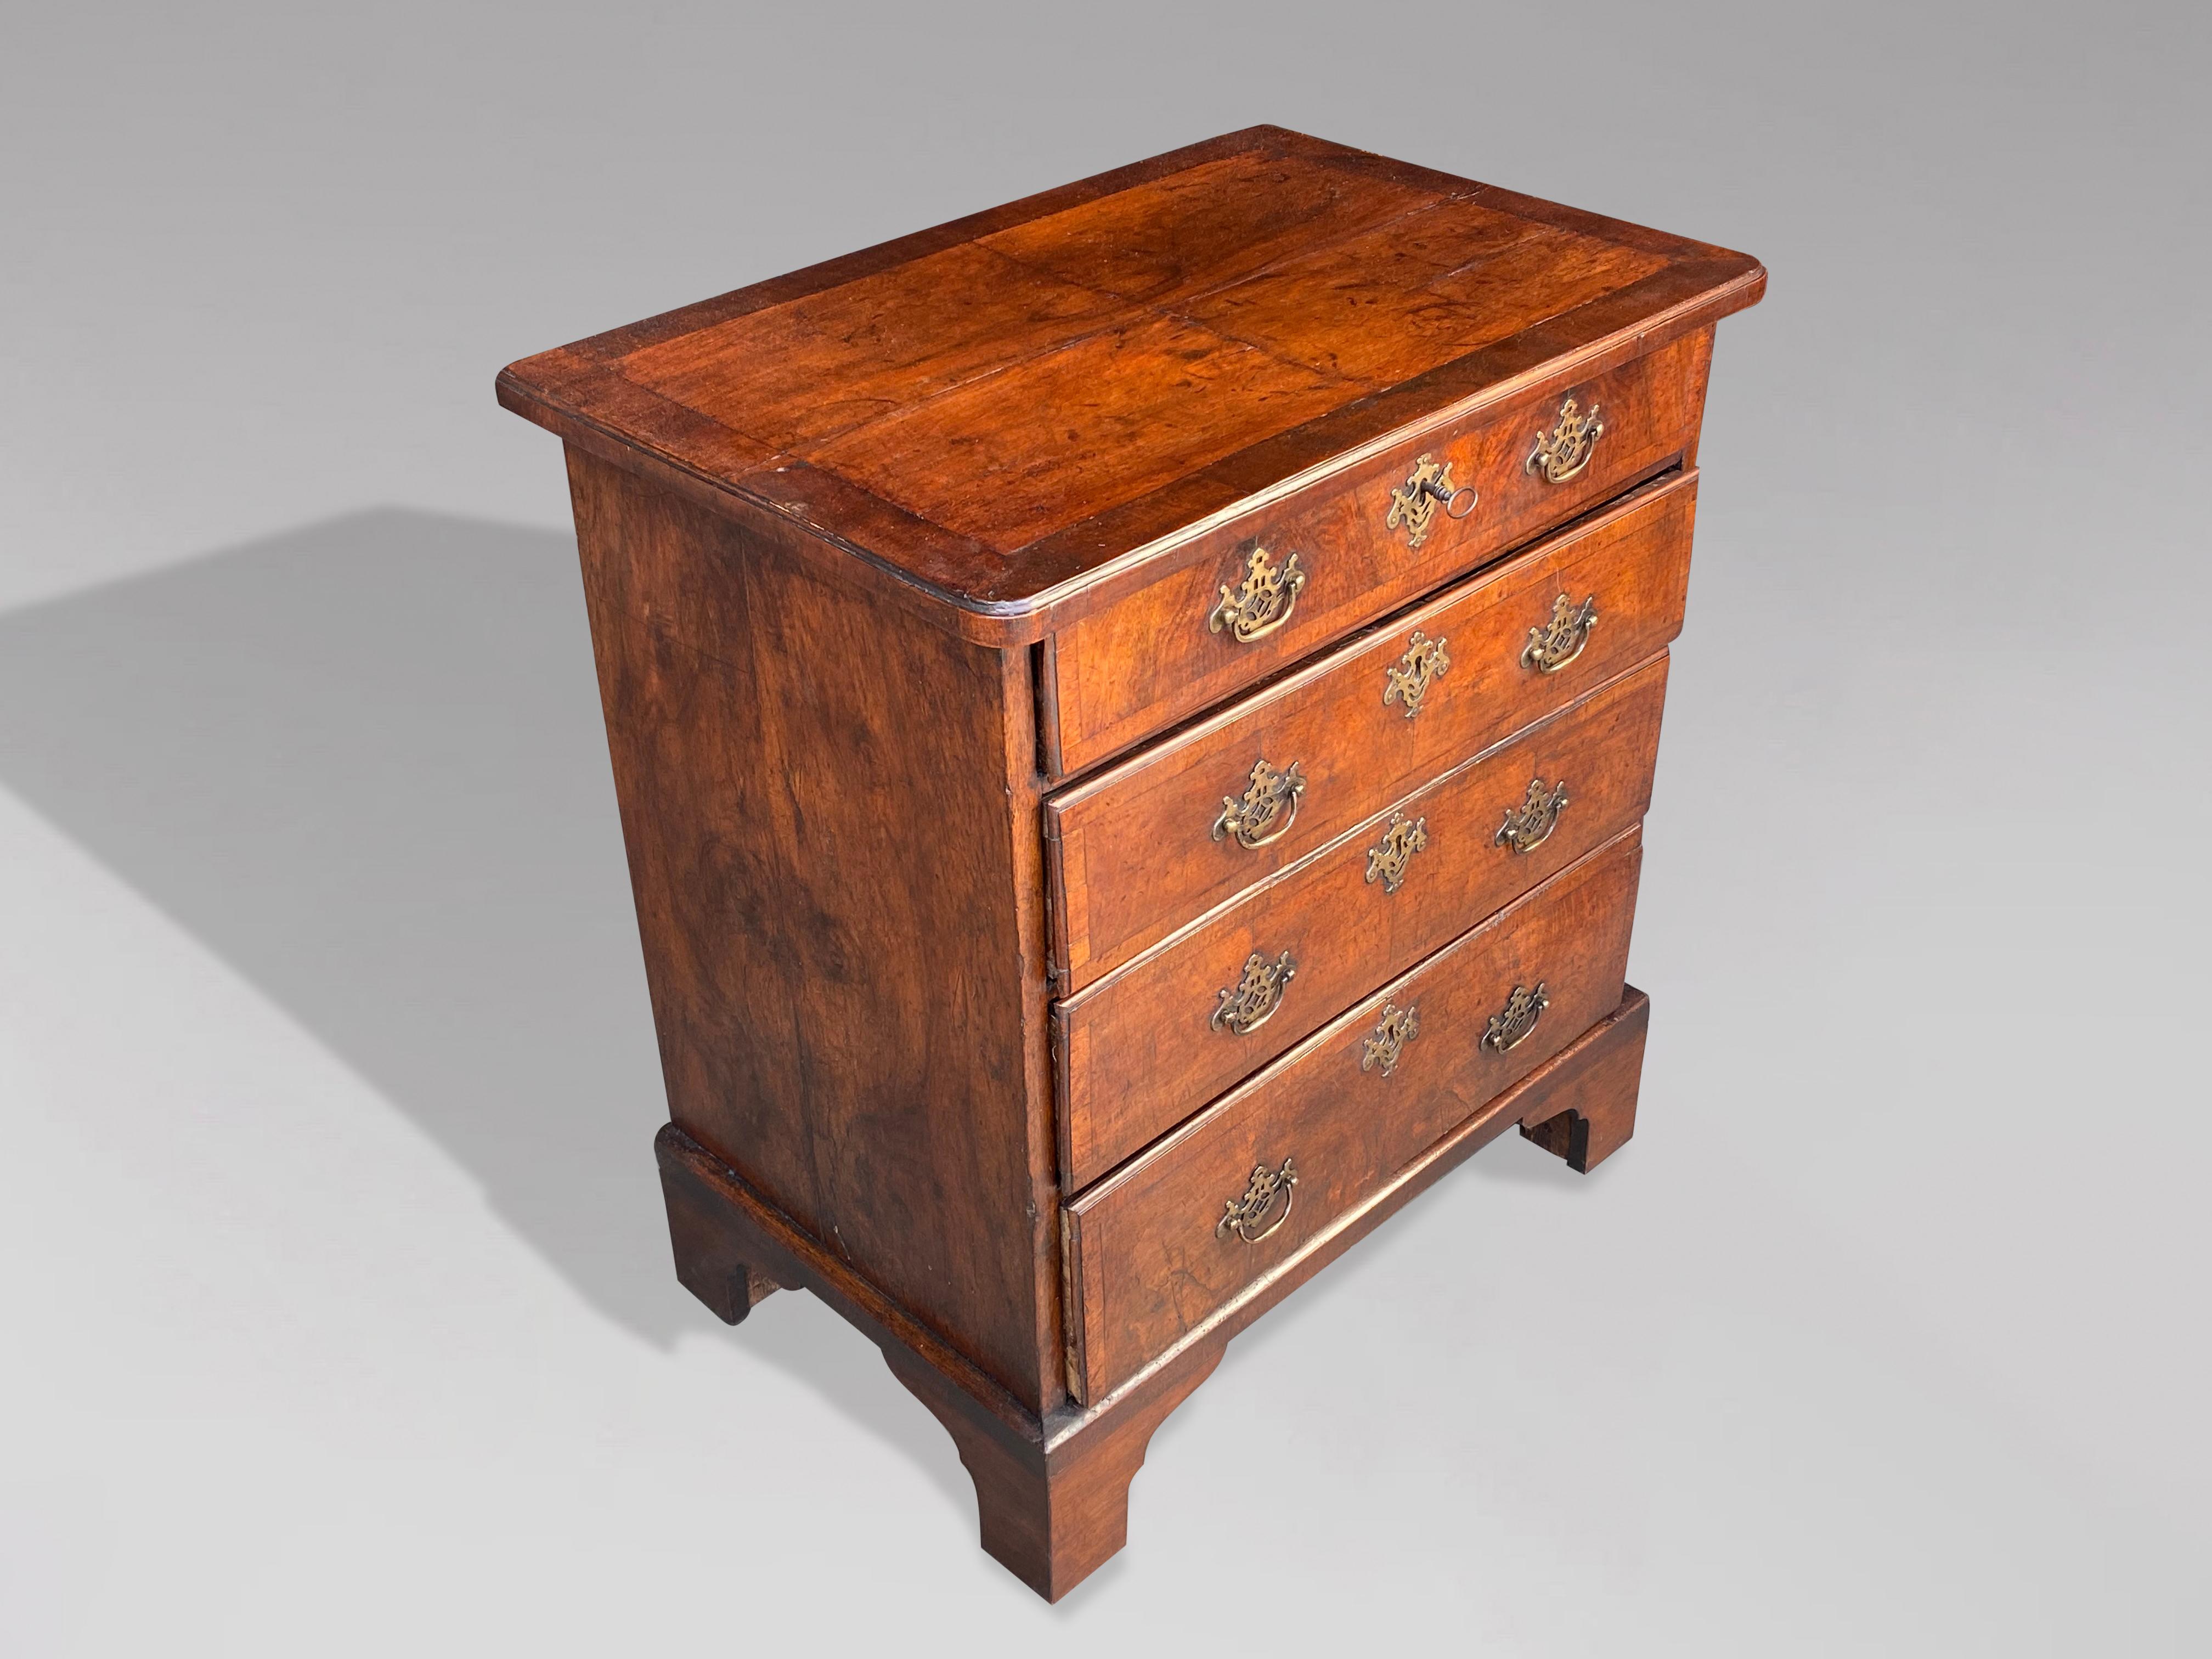 A fine late 18th century, George III period walnut and oak lined chest of drawers of smaller proportions and of great colour & patina. A rectangular veneered walnut top with moulded edge above four long graduated oak lined drawers standing on